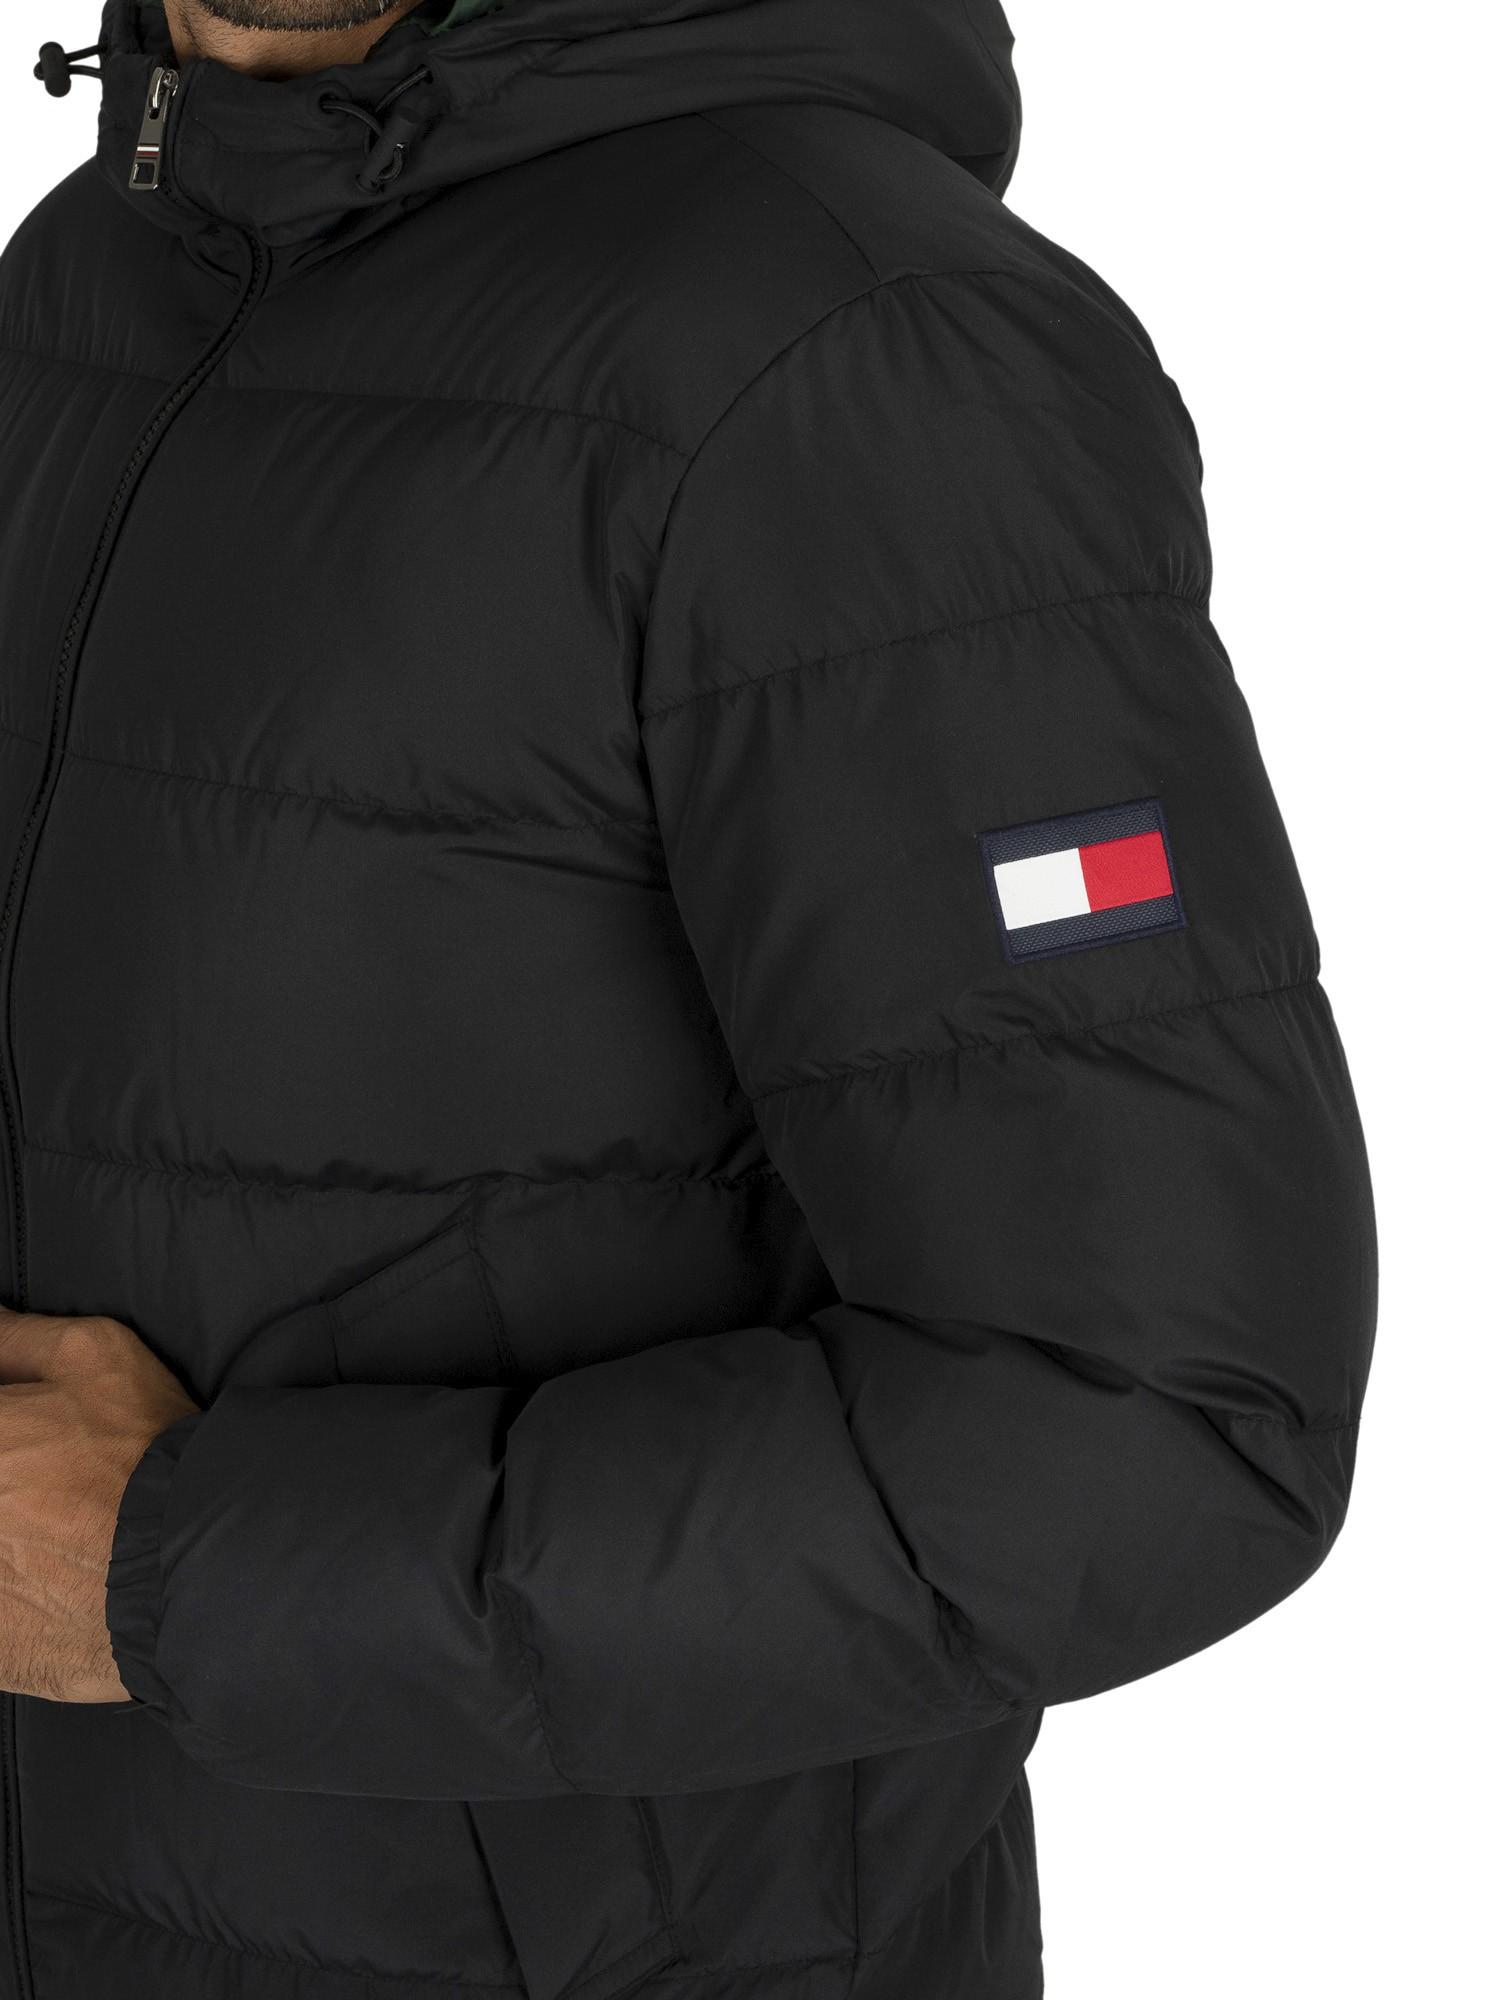 Tommy Hilfiger Synthetic Hooded Redown Bomber Jacket in Black for Men - Lyst